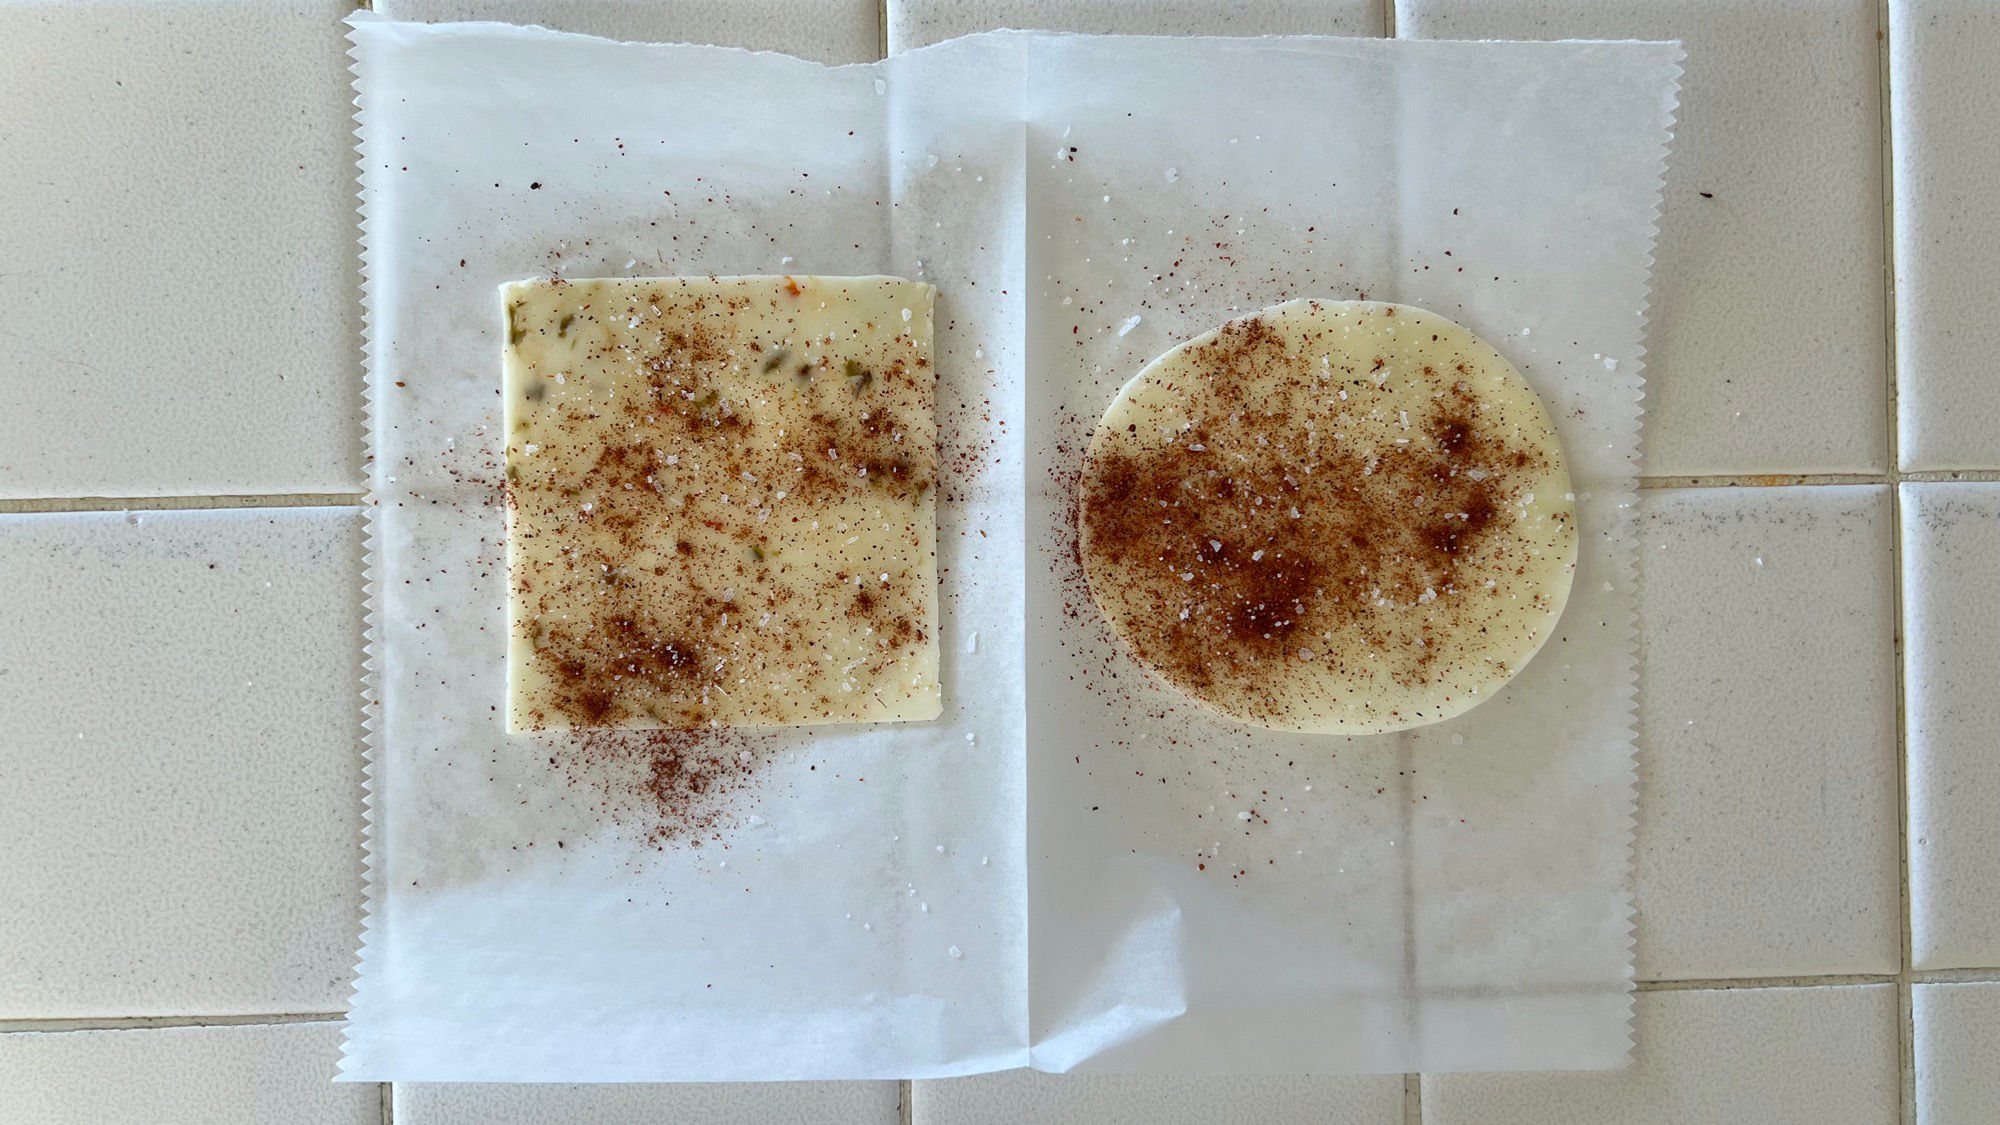 Home Made Cheese-It Oven Times Vary